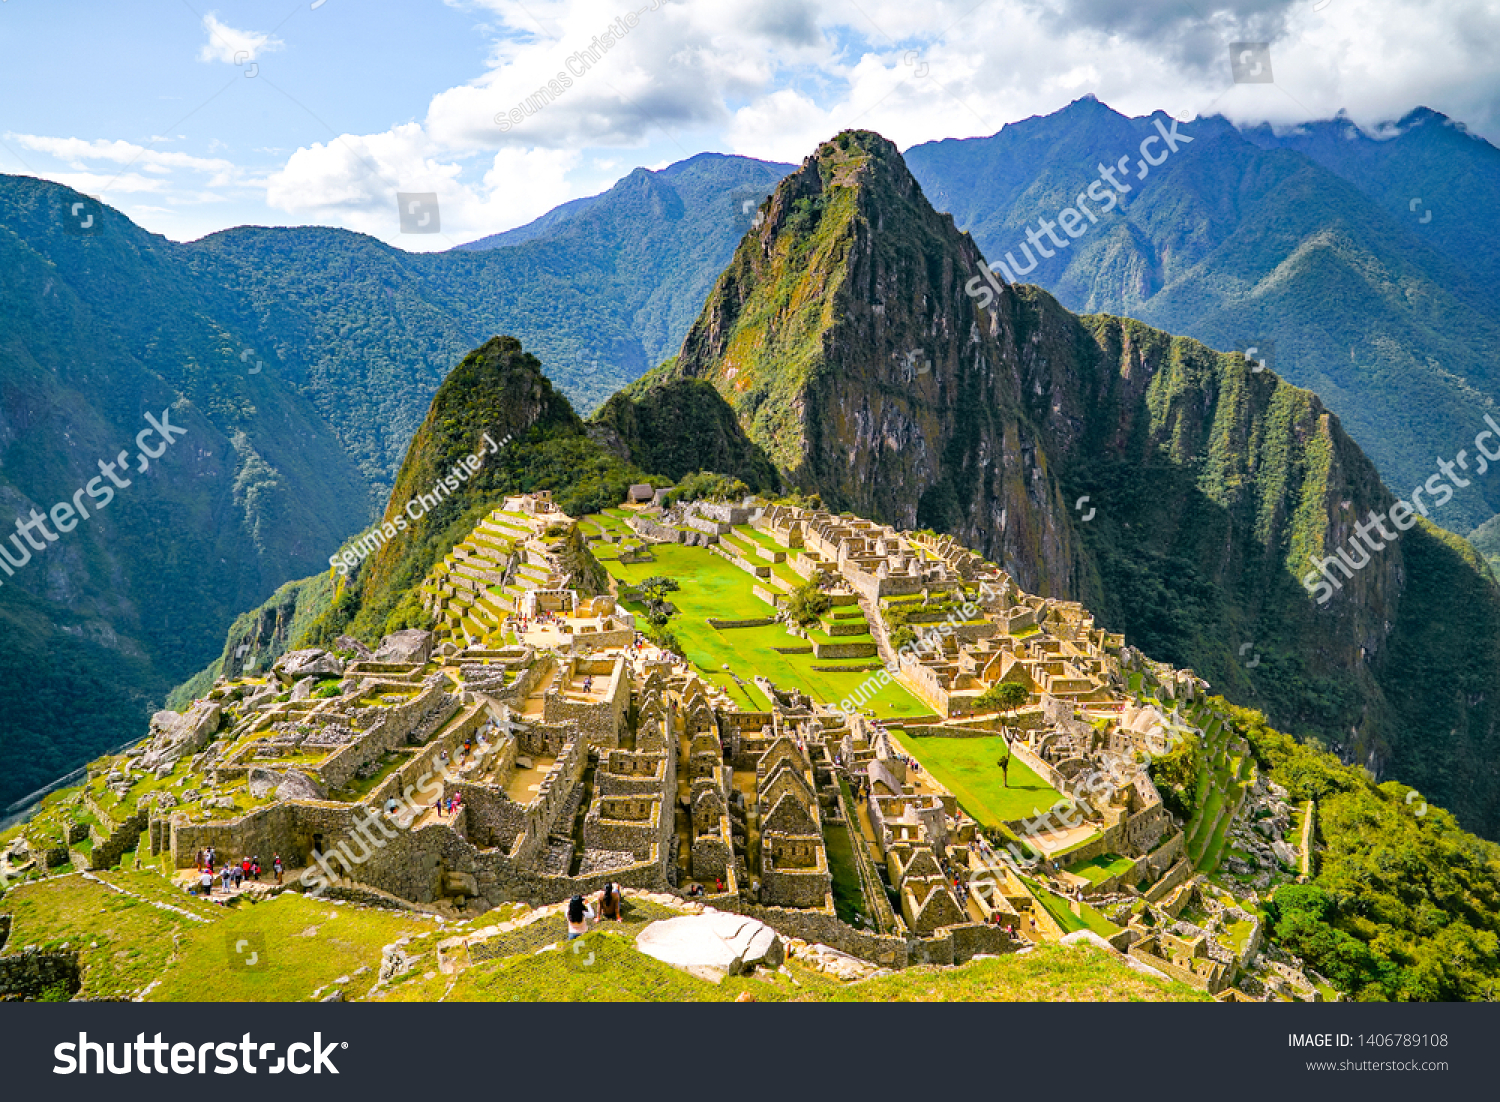 The famous Machu Picchu is a 15th-century is located in the Cusco region of Peru. The beauty of this historic site never ceases to amaze, with people coming from all over the world to visit it.
 #1406789108